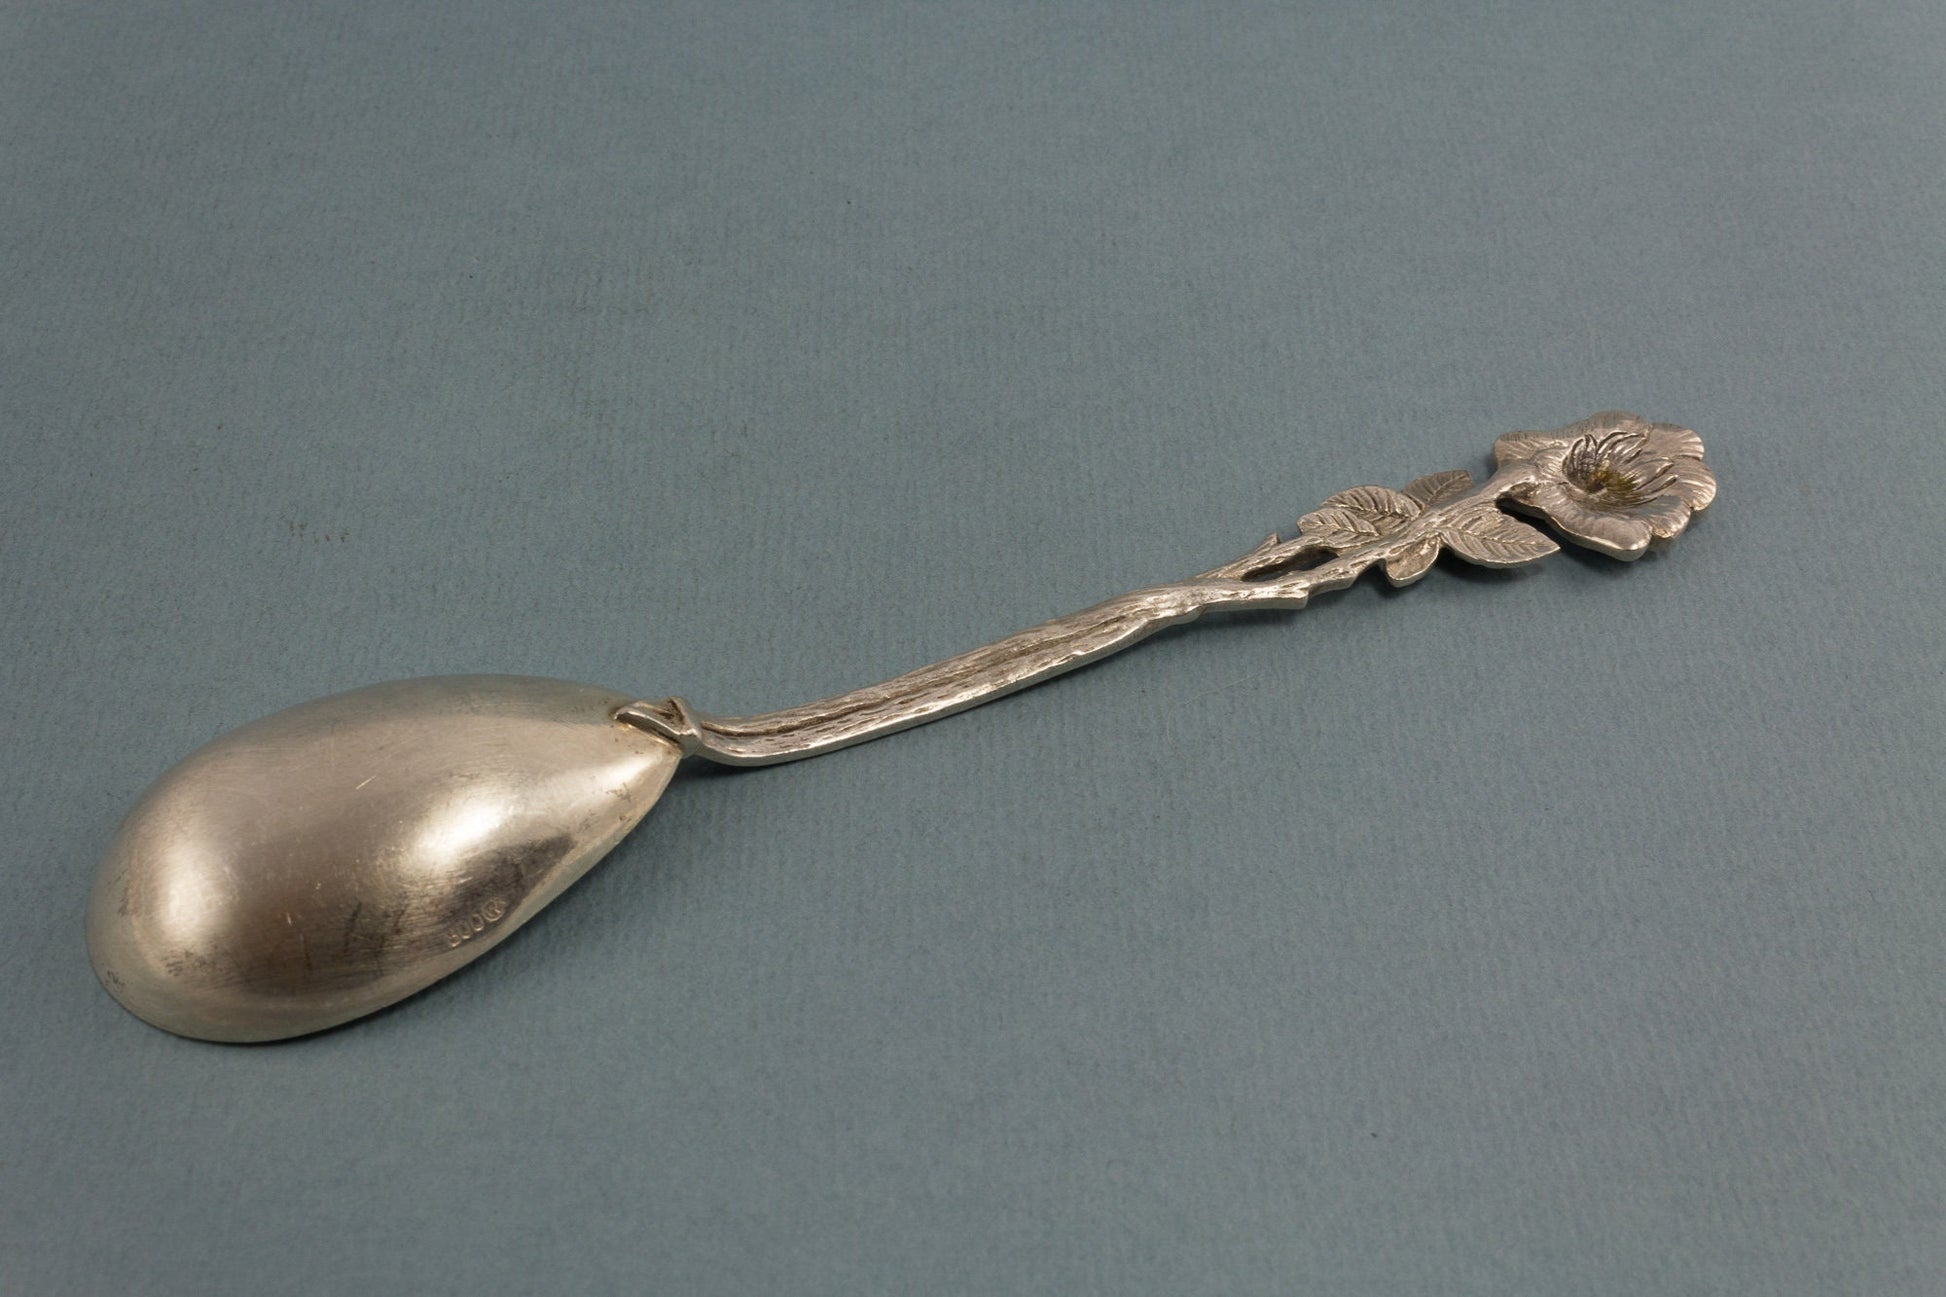 Silver sugar spoon with roses, 800 silver